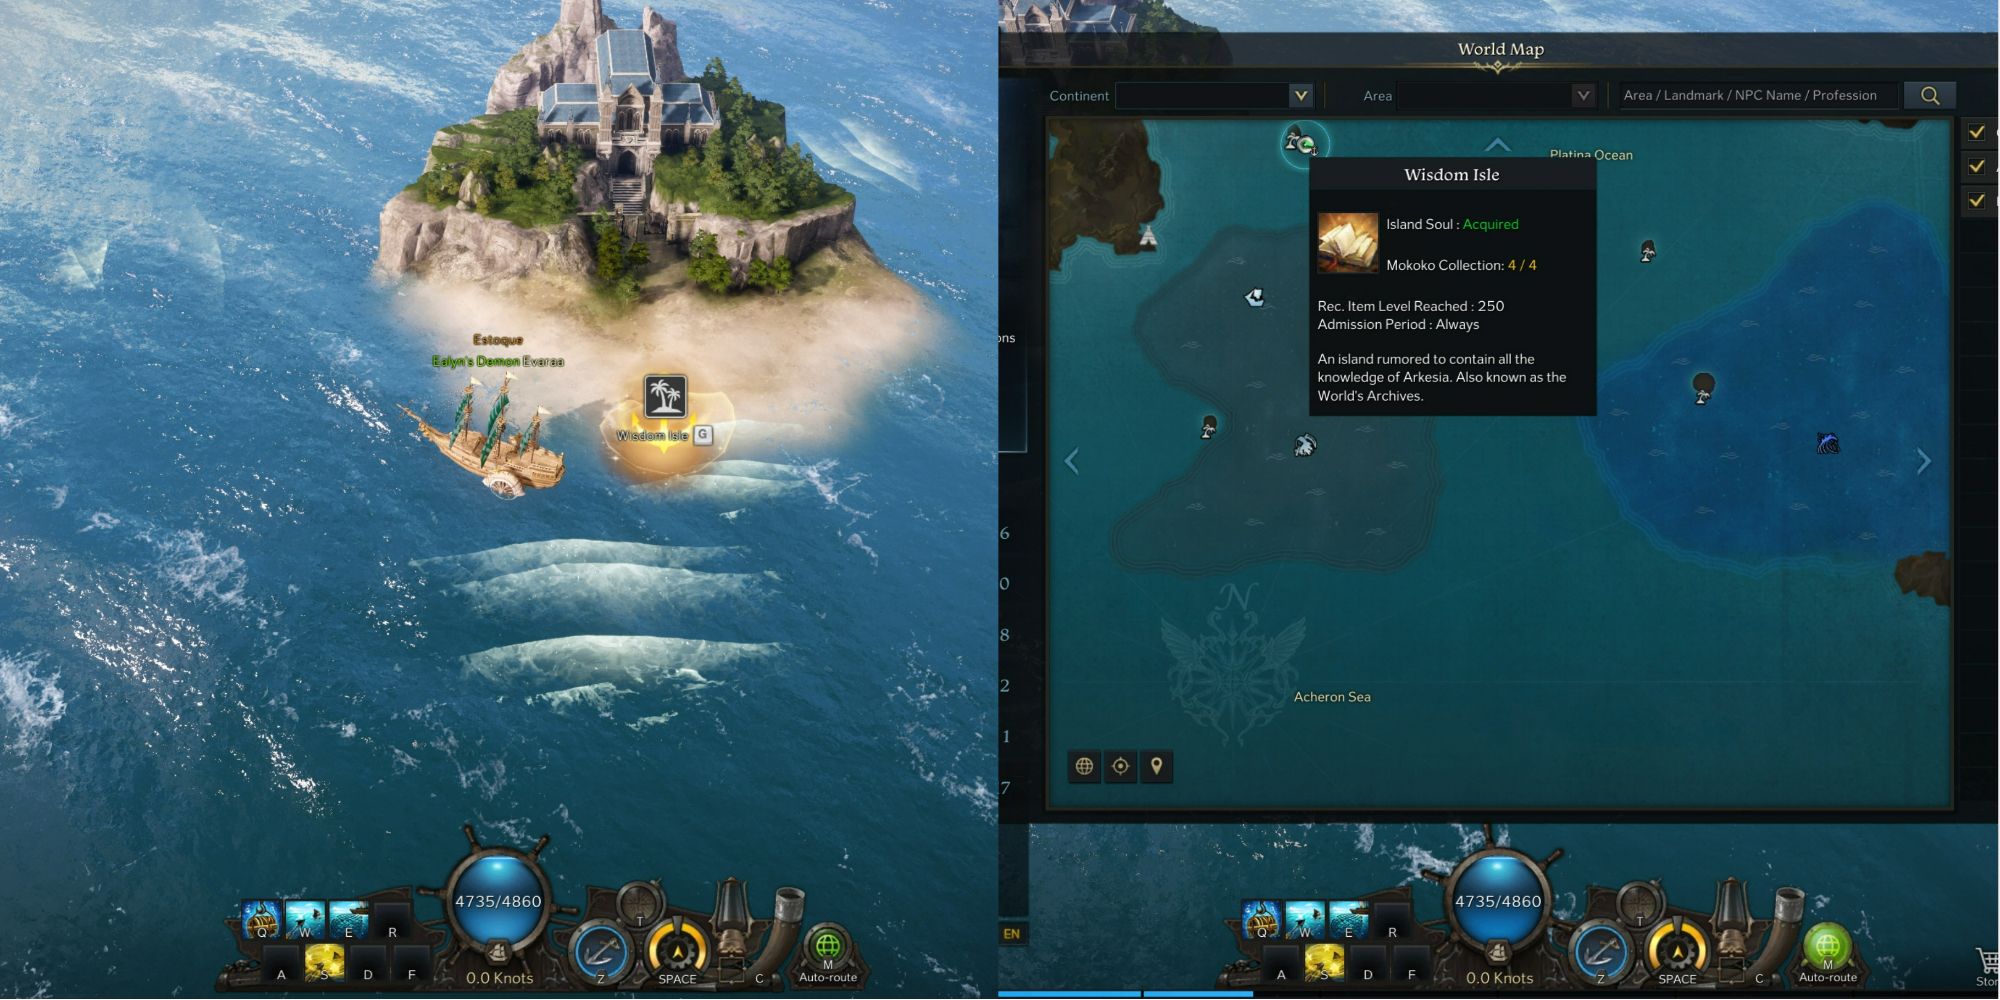 Lost Ark split image of Wisdom Isle location in open seas and on map